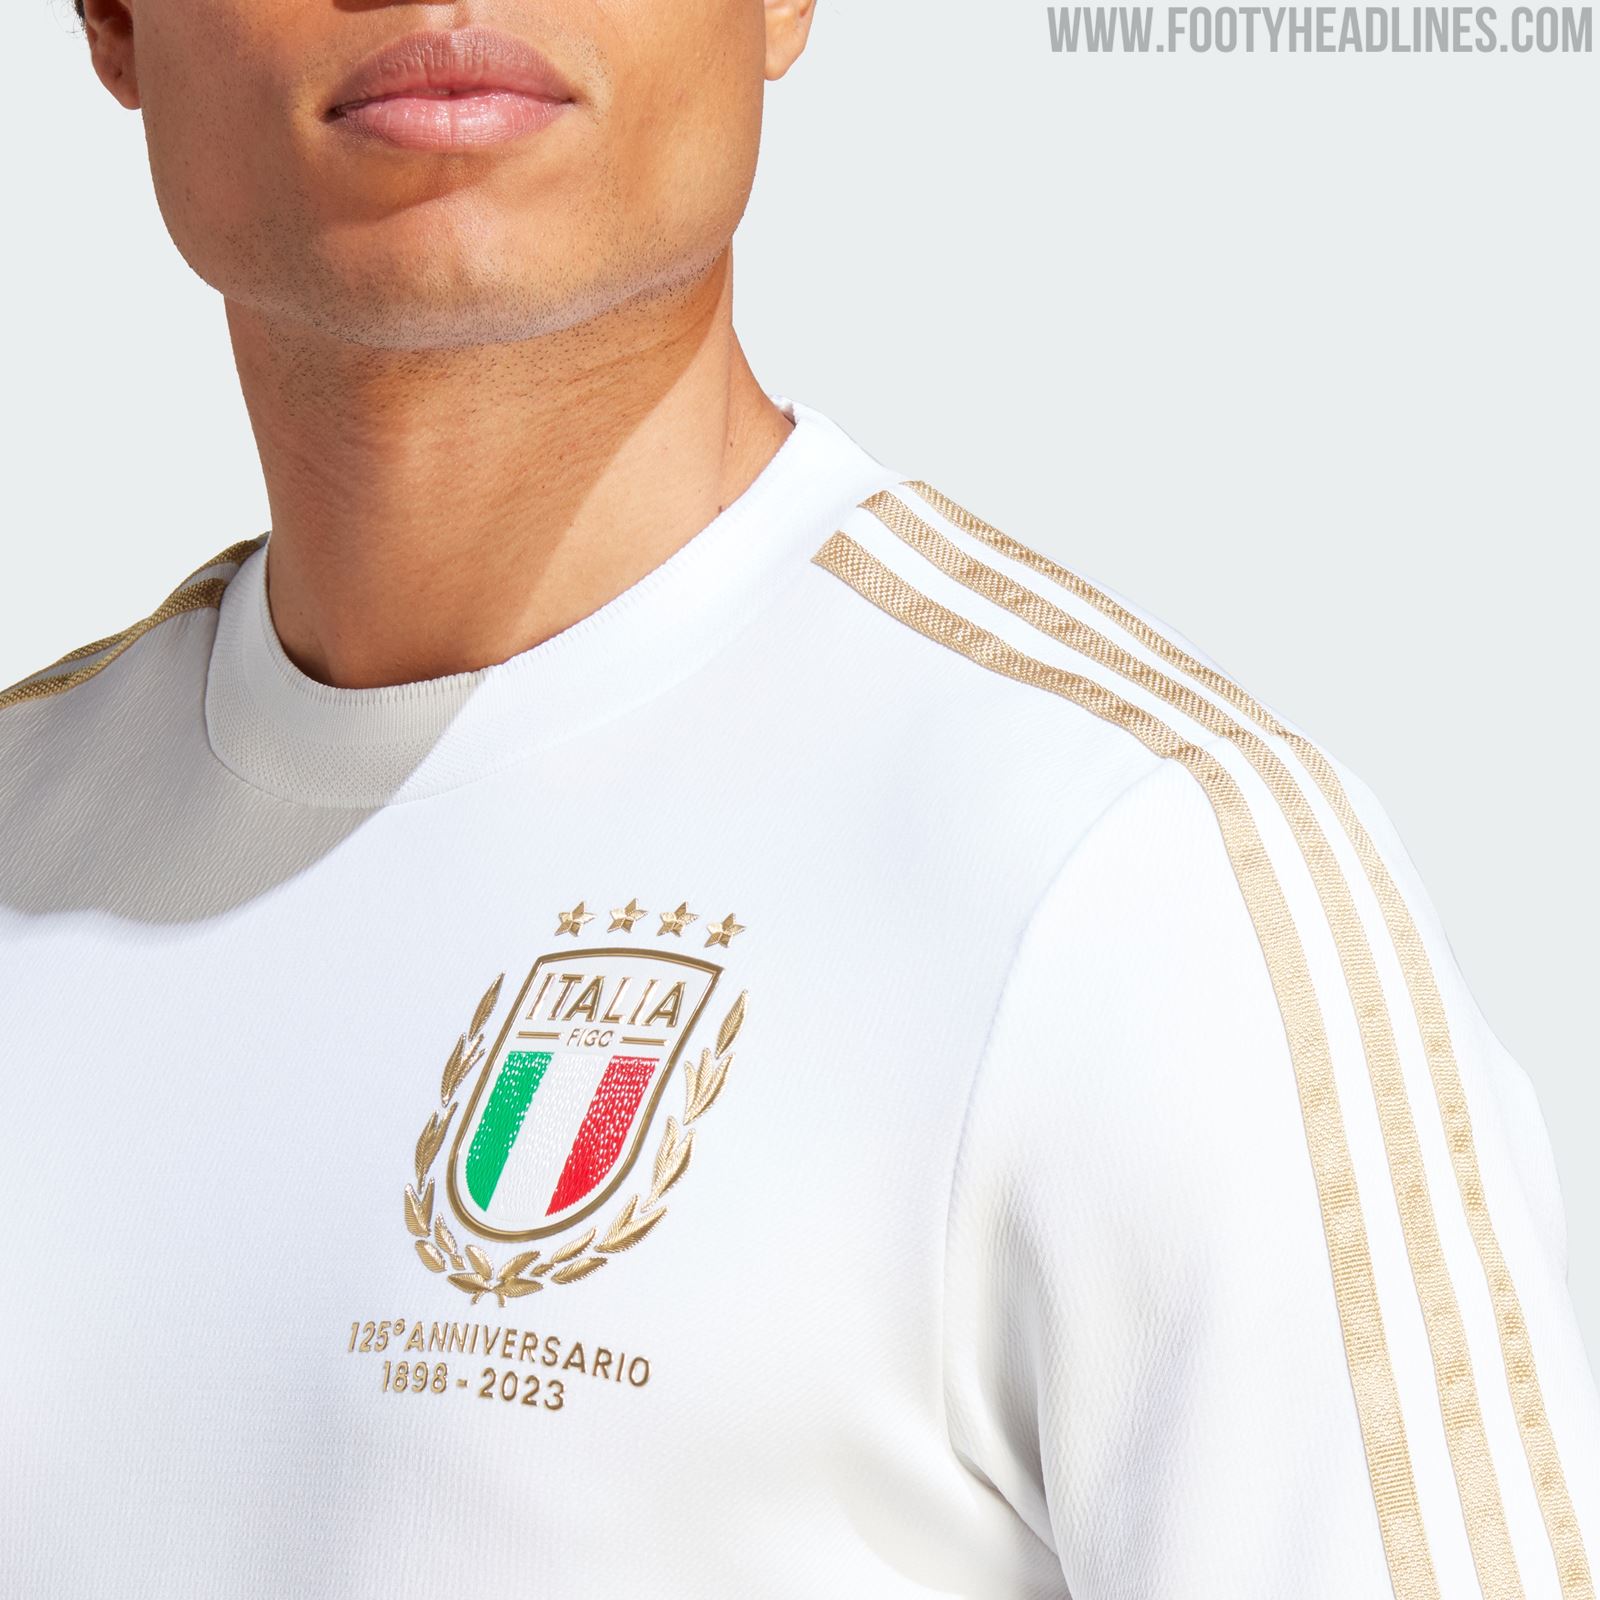 Confirmed: Full Three Stripes Removed For Adidas Italy 125 Years Anniversary  Kit Debut - Footy Headlines